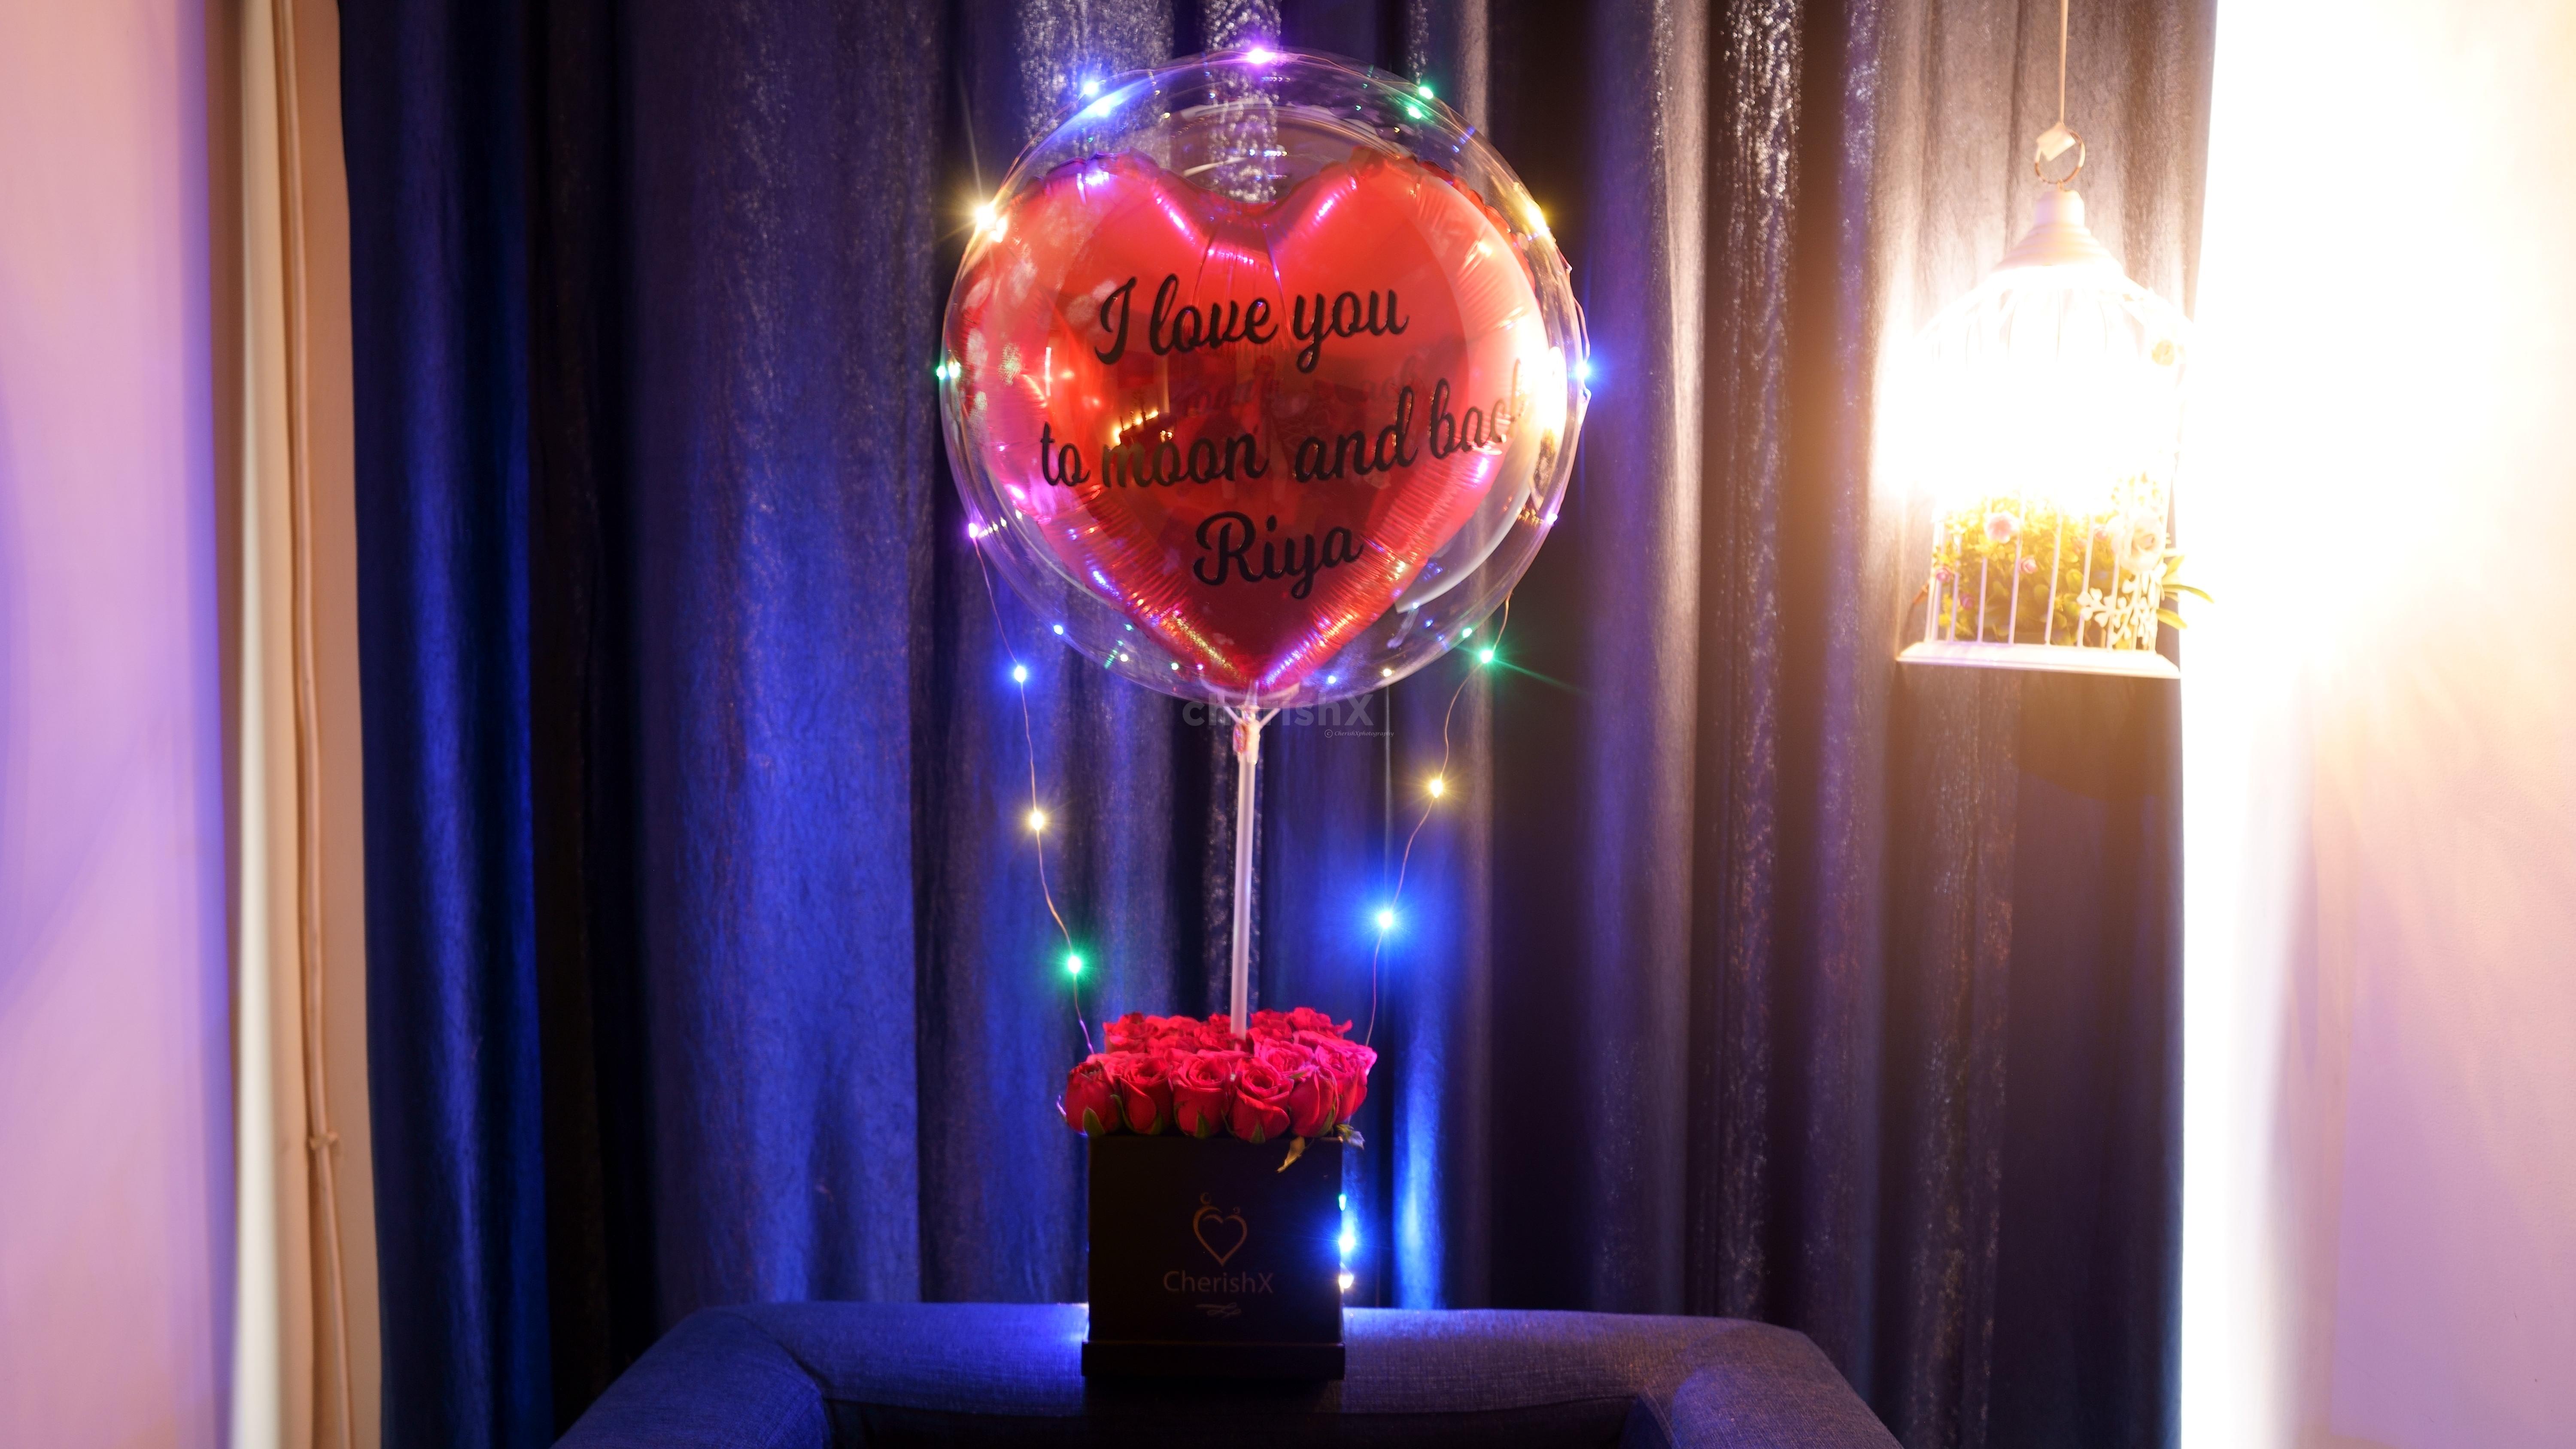 Tell your partner how much they means to you by gifting this Rose bucket with a love bubble